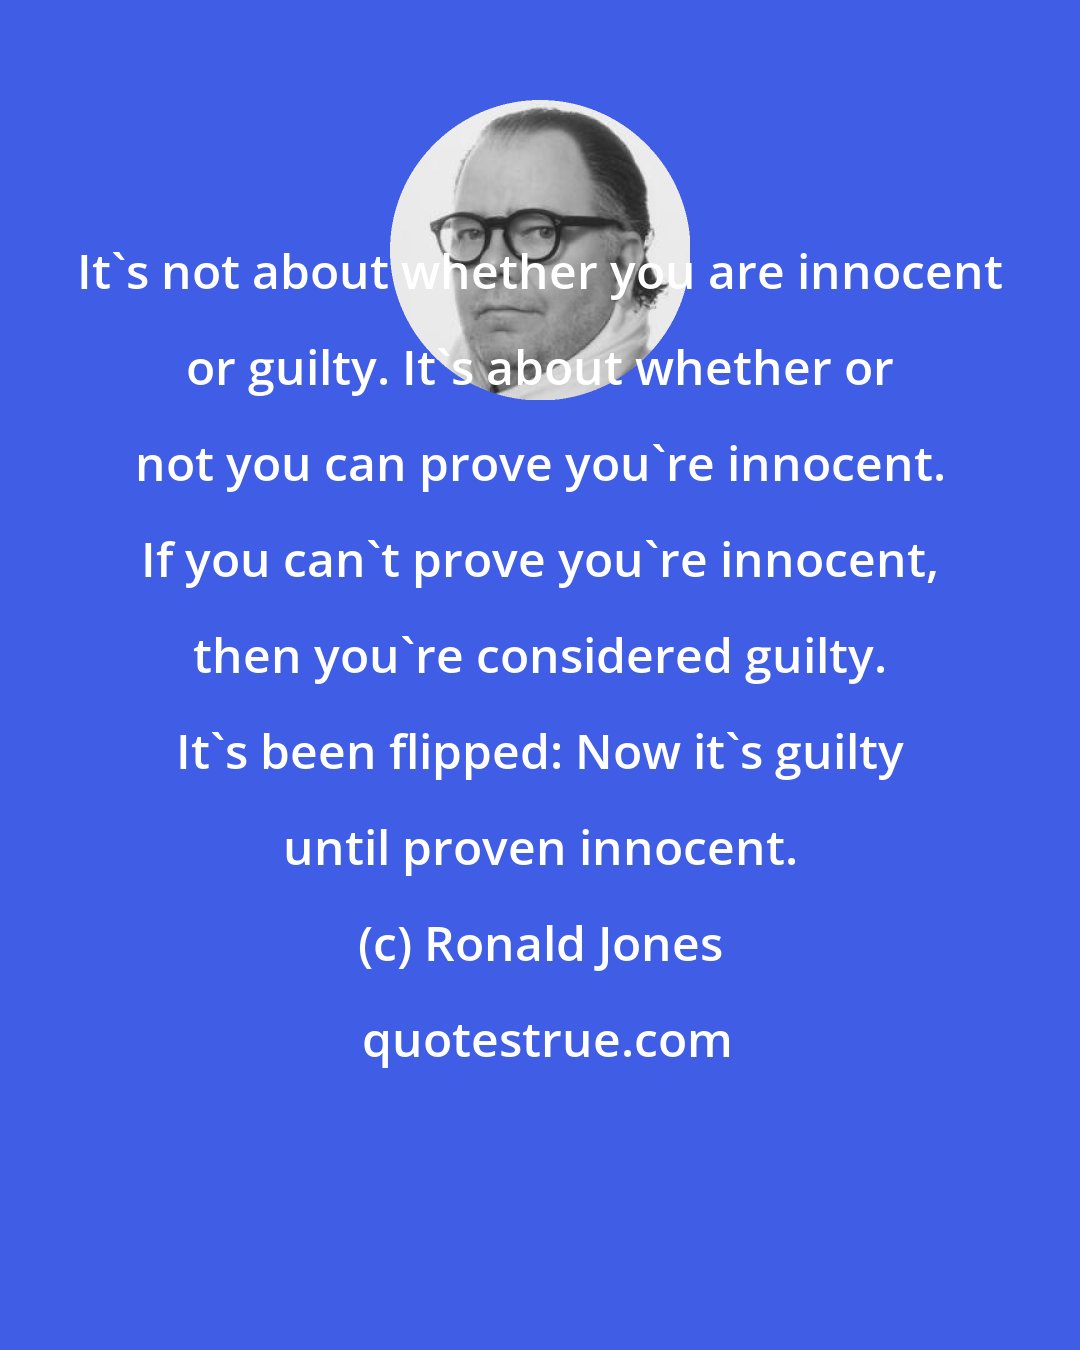 Ronald Jones: It's not about whether you are innocent or guilty. It's about whether or not you can prove you're innocent. If you can't prove you're innocent, then you're considered guilty. It's been flipped: Now it's guilty until proven innocent.